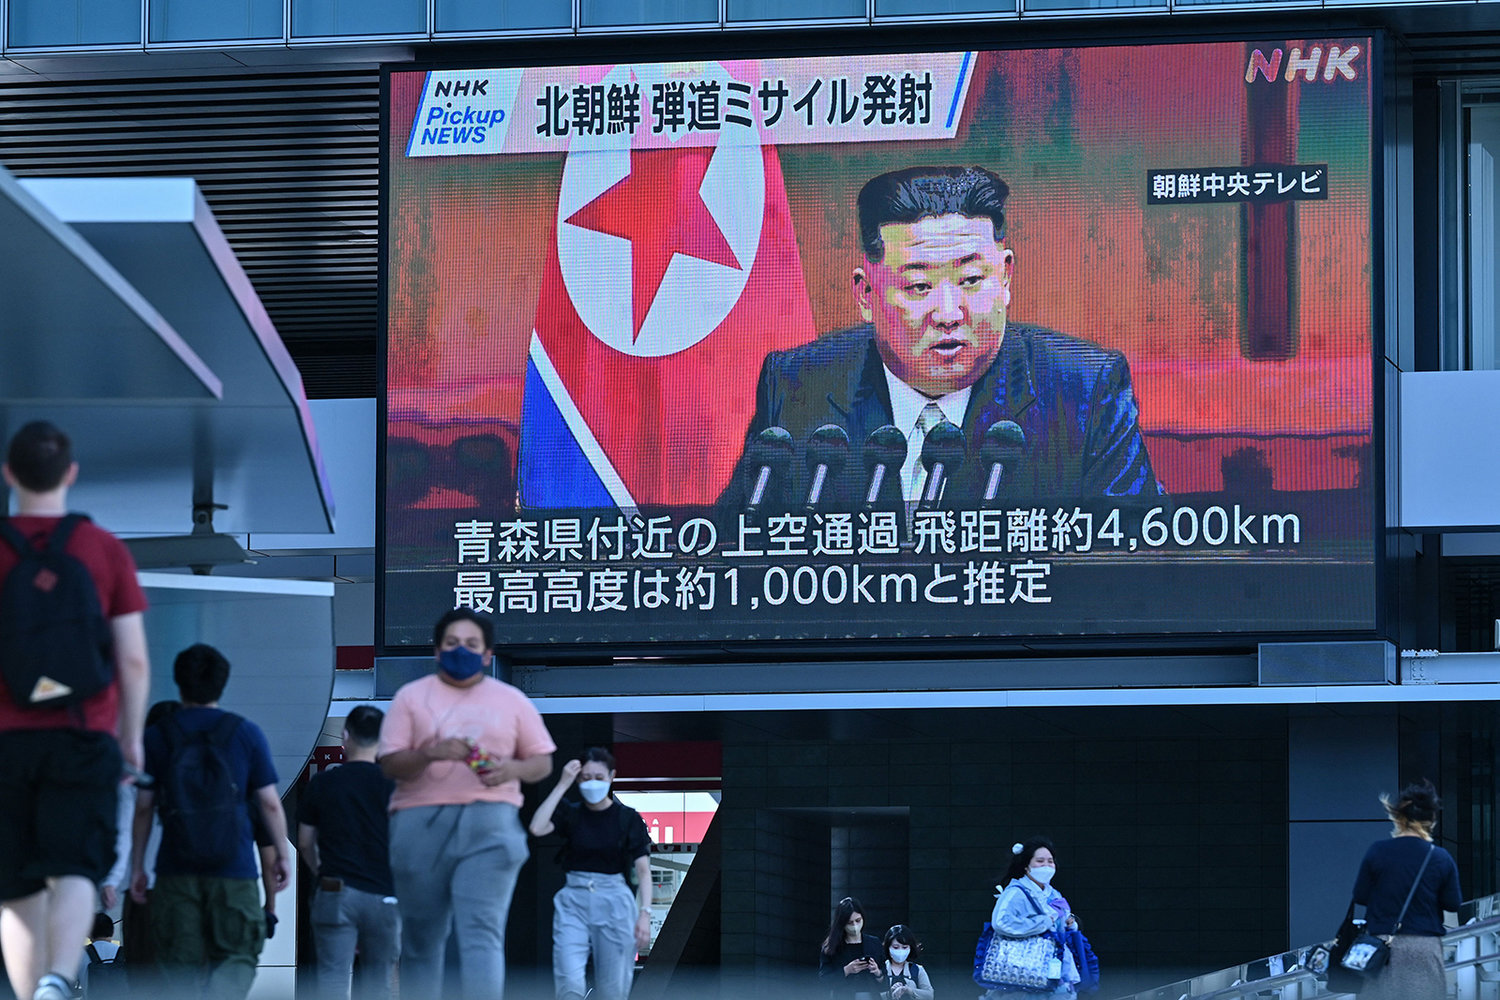 Pedestrians walk under a large video screen showing images of North Korea's leader Kim Jong Un during a news update in Tokyo on Oct. 4, 2022, after North Korea launched a missile early in the day which prompted an evacuation alert when it flew over northeastern Japan. - North Korea fired a ballistic missile over Japan for the first time in five years on Oct. 4, prompting Tokyo to activate its missile alert system and issue a rare warning for people to take shelter. (Richard A. Brooks/AFP via Getty Images/TNS)